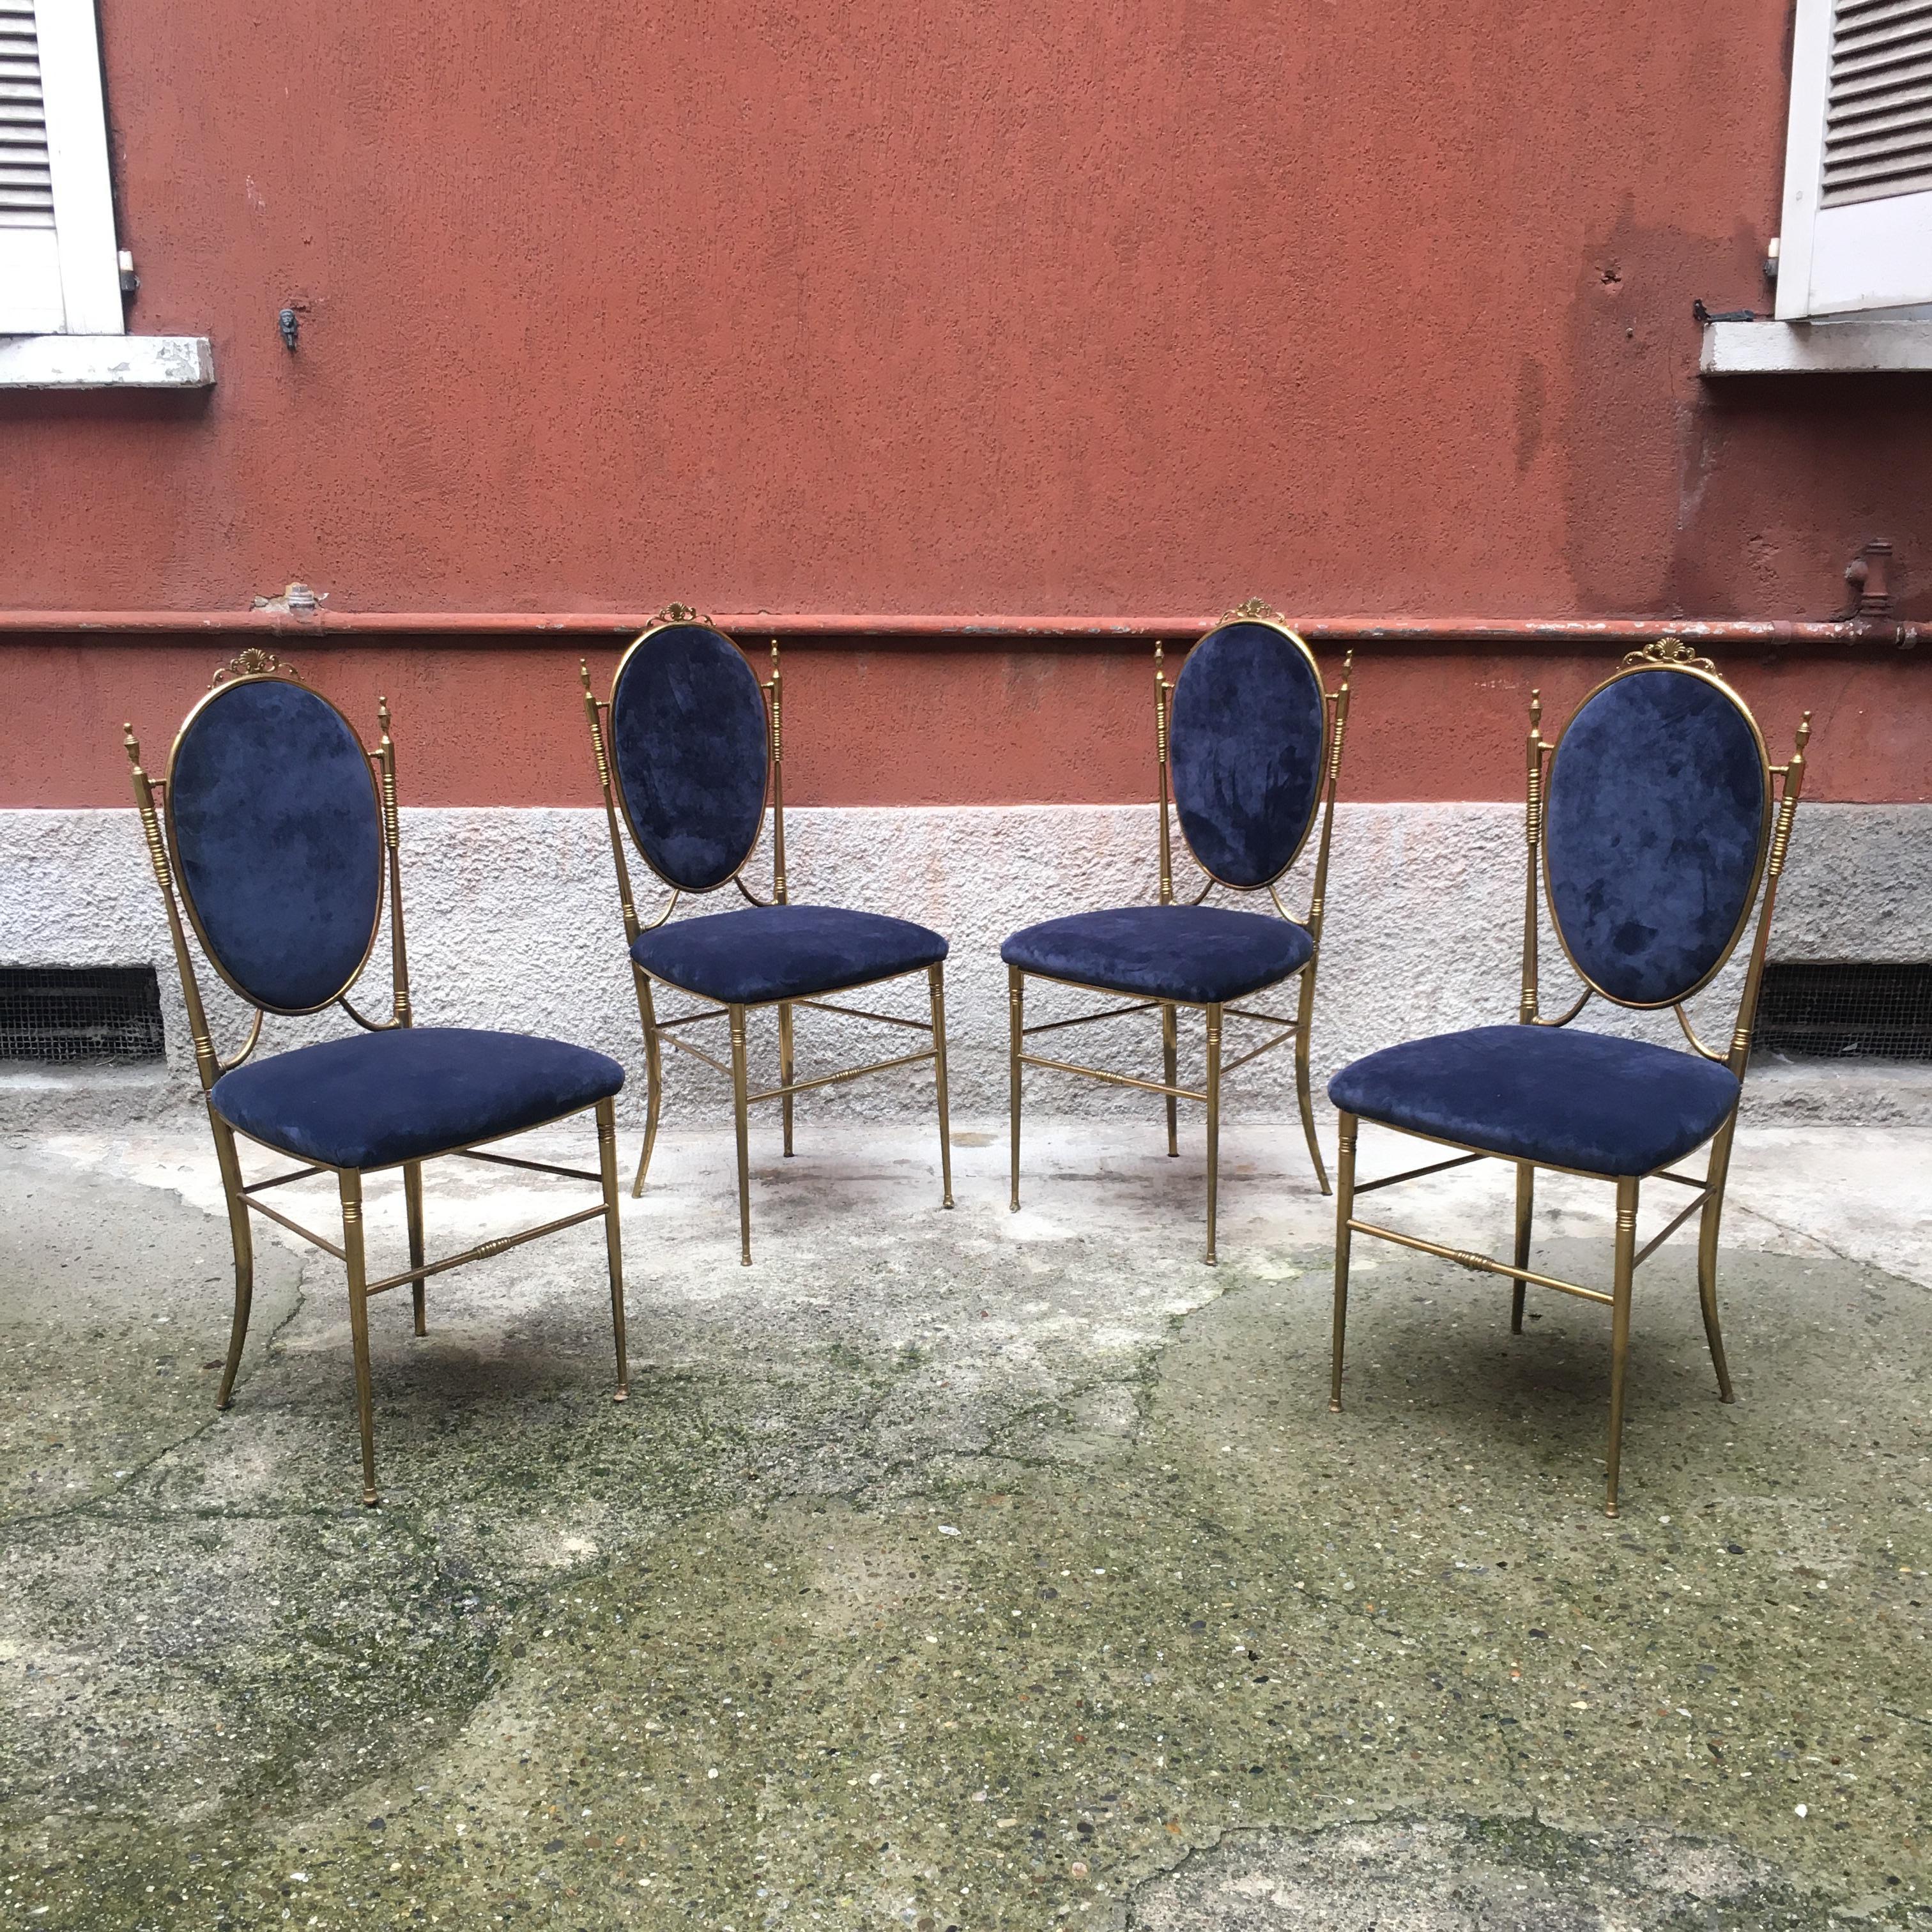 Italian Brass and Velvet Dining Room Chairs, 1940s
Four chairs with solid brass structure and blue velvet padding
Restructured and covered with a new fabric
Very good condition
Measures 42x42x99 and seat height 46 cm